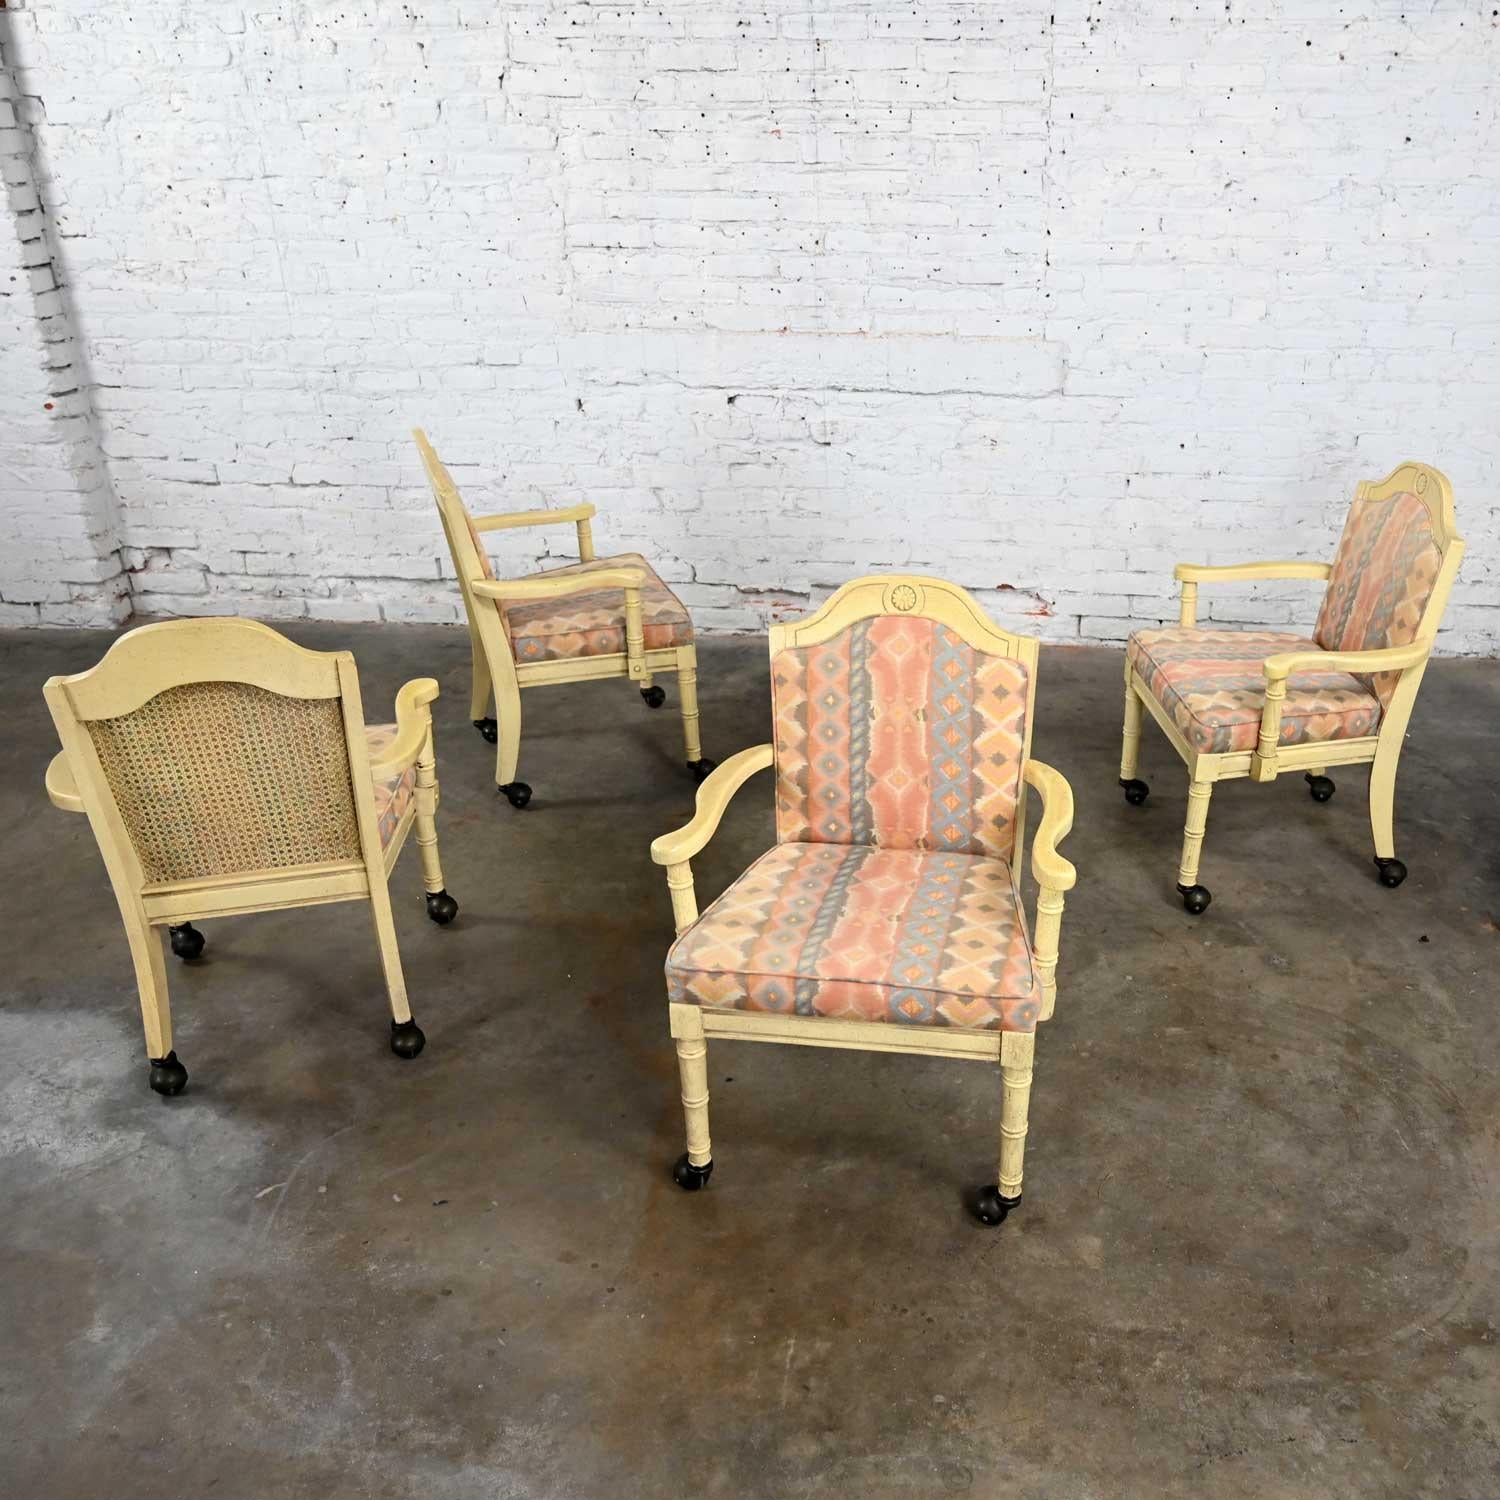 Stunning vintage Campaign or French Country rolling game chairs set of 4 by Burlington House Furniture. Comprised of antique white painted wood frames, upholstered seat and back cushions in the original pastel Southwestern fabric, cane seat backs,